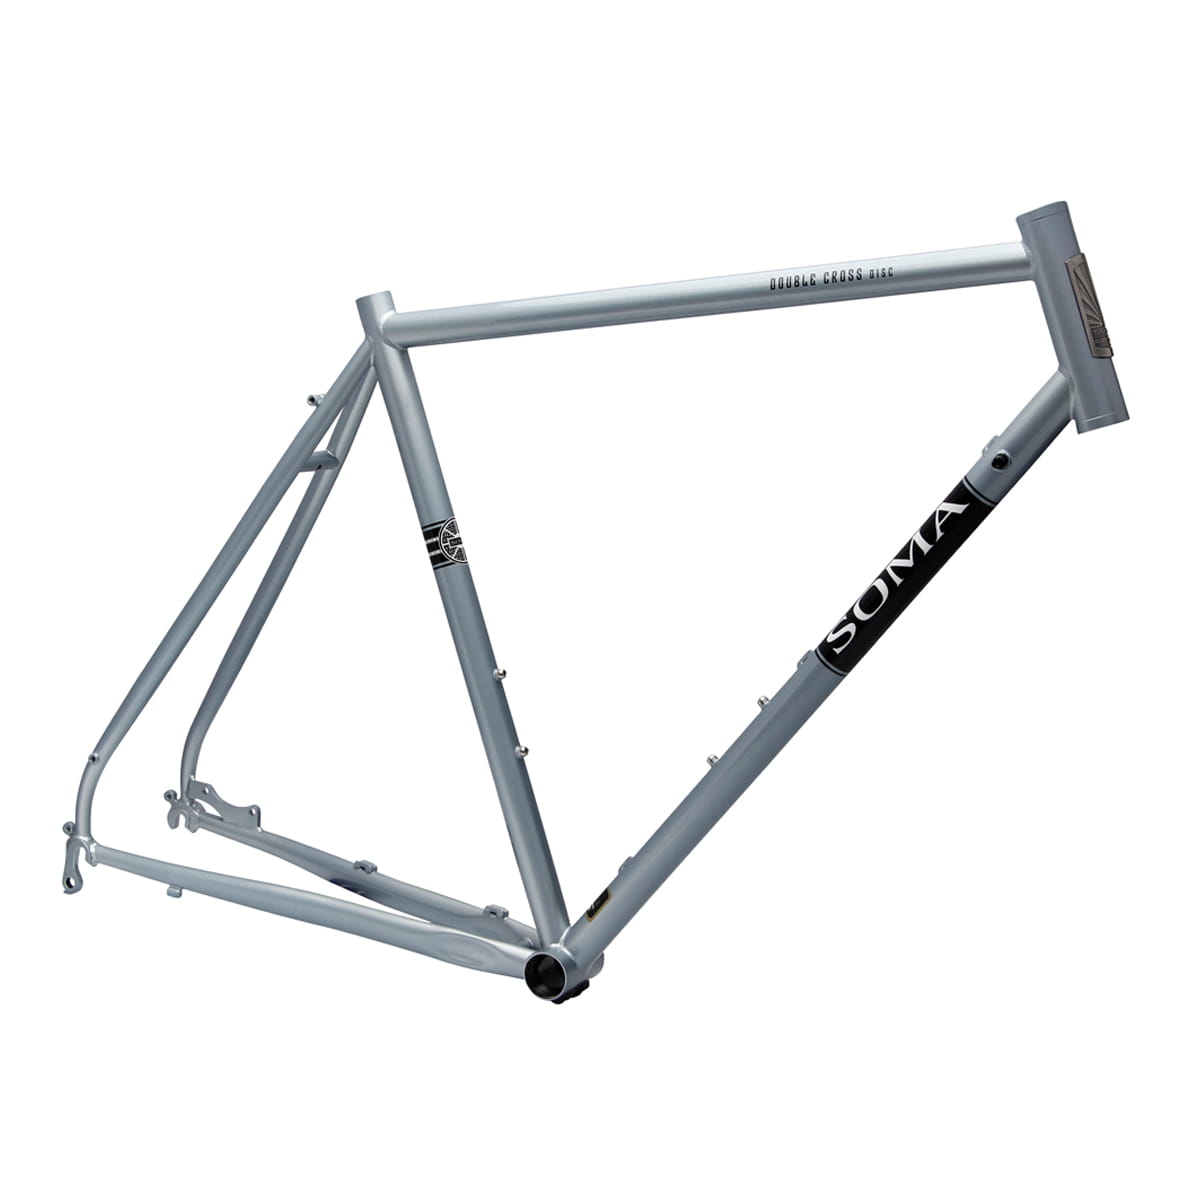 soma double cross for sale